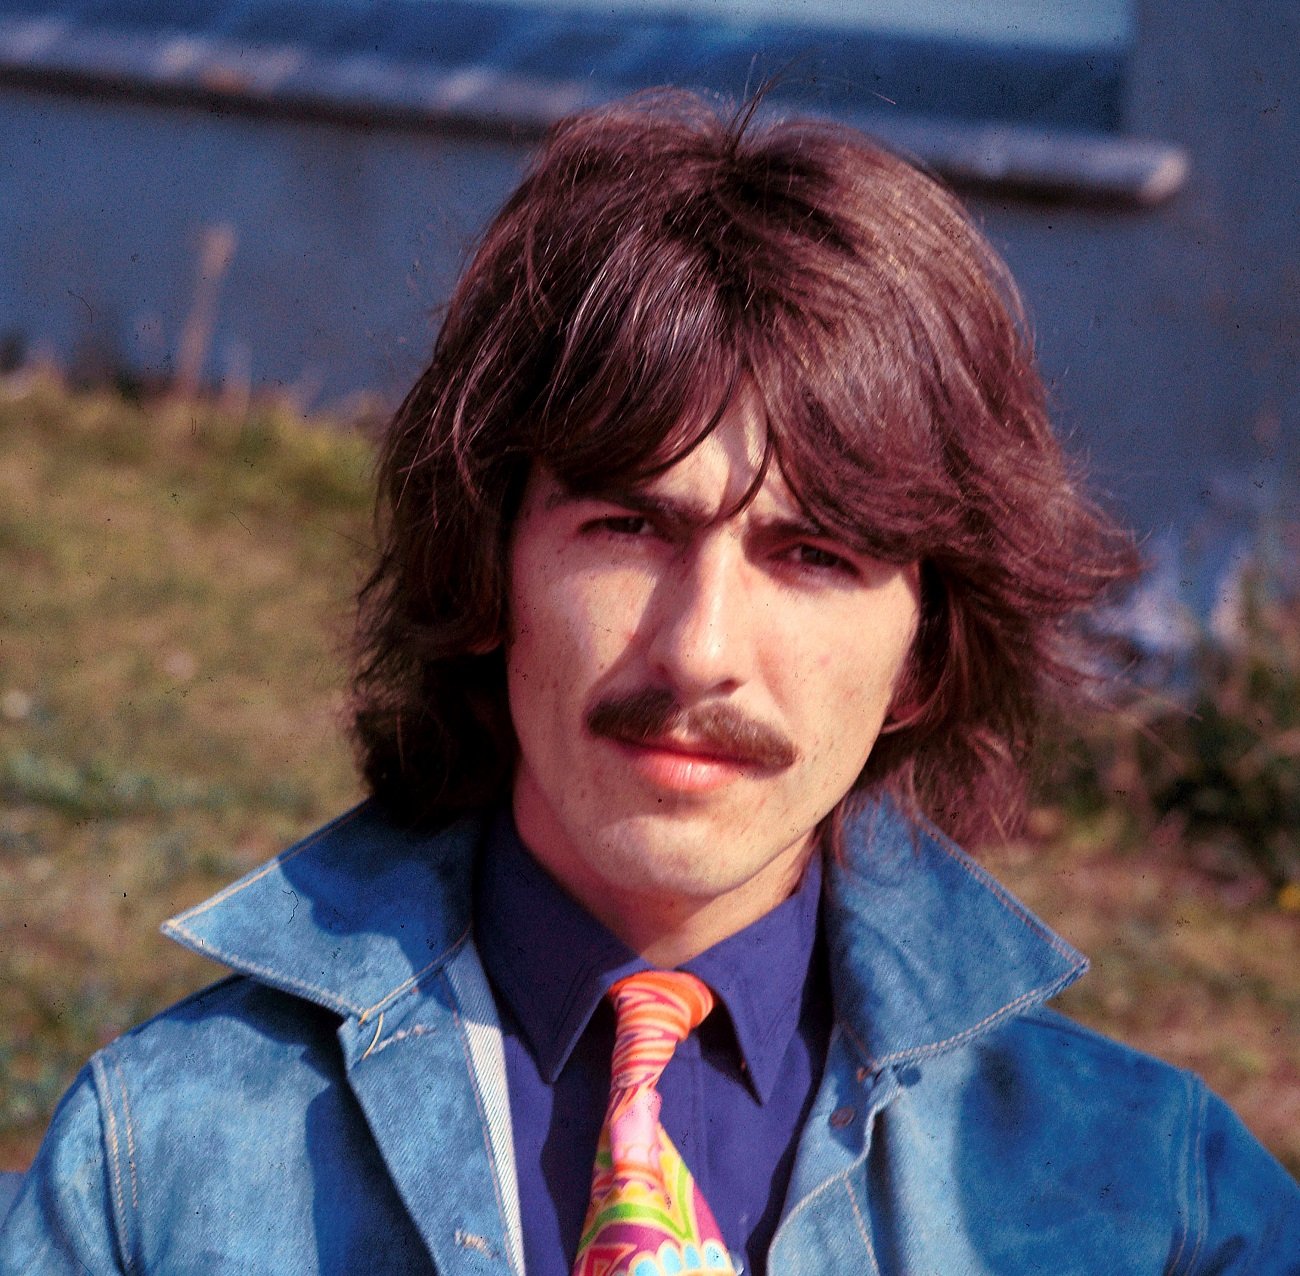 George Harrison wears a denim jacket and tie and poses near water.